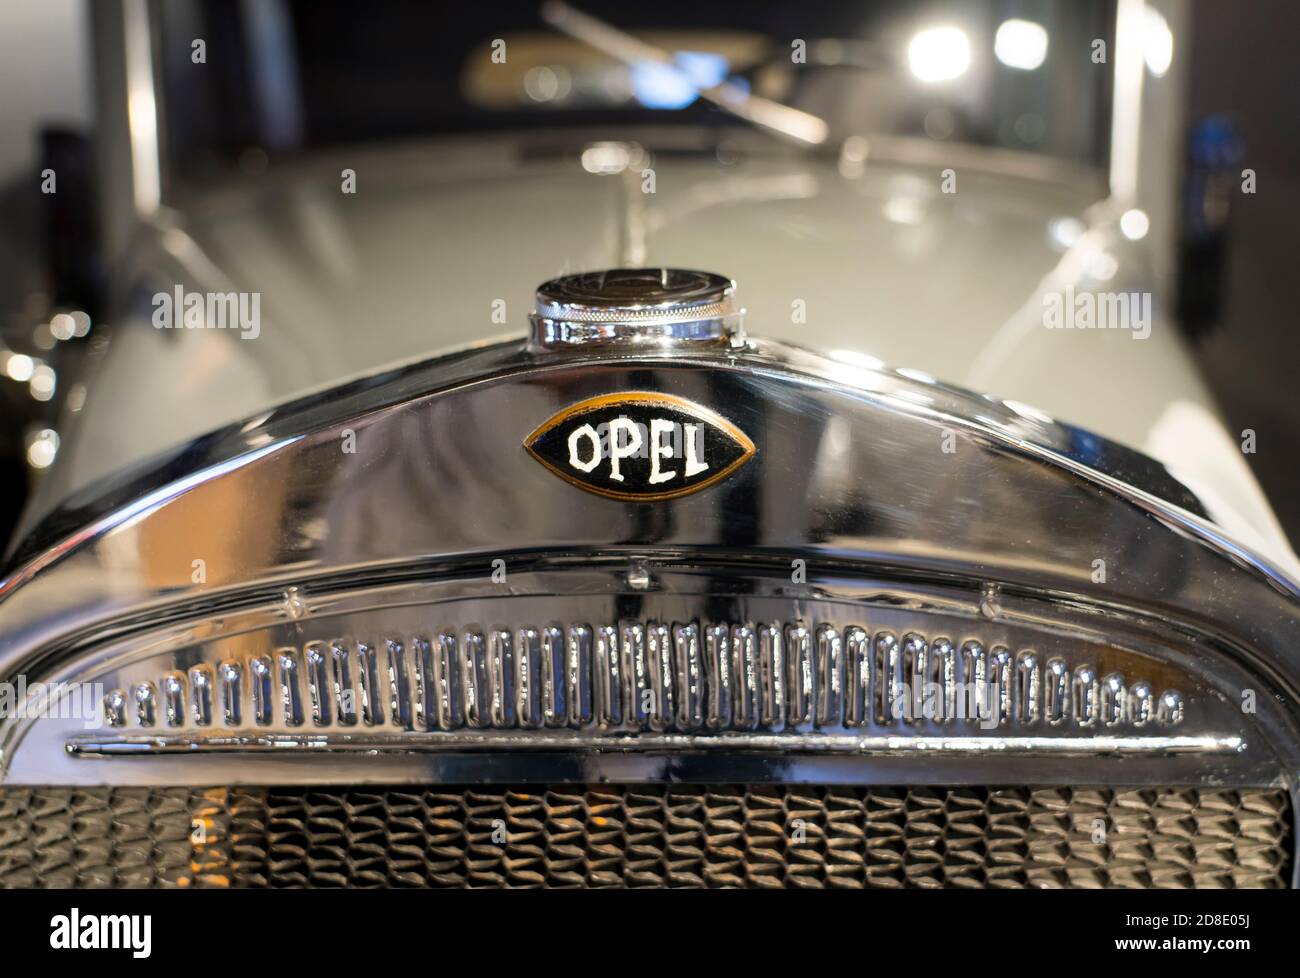 Opel classic car, German car manufacturer Opel, 1930s, PS.SPEICHER Museum, Einbeck, Lower Saxony, Germany, Europe Stock Photo